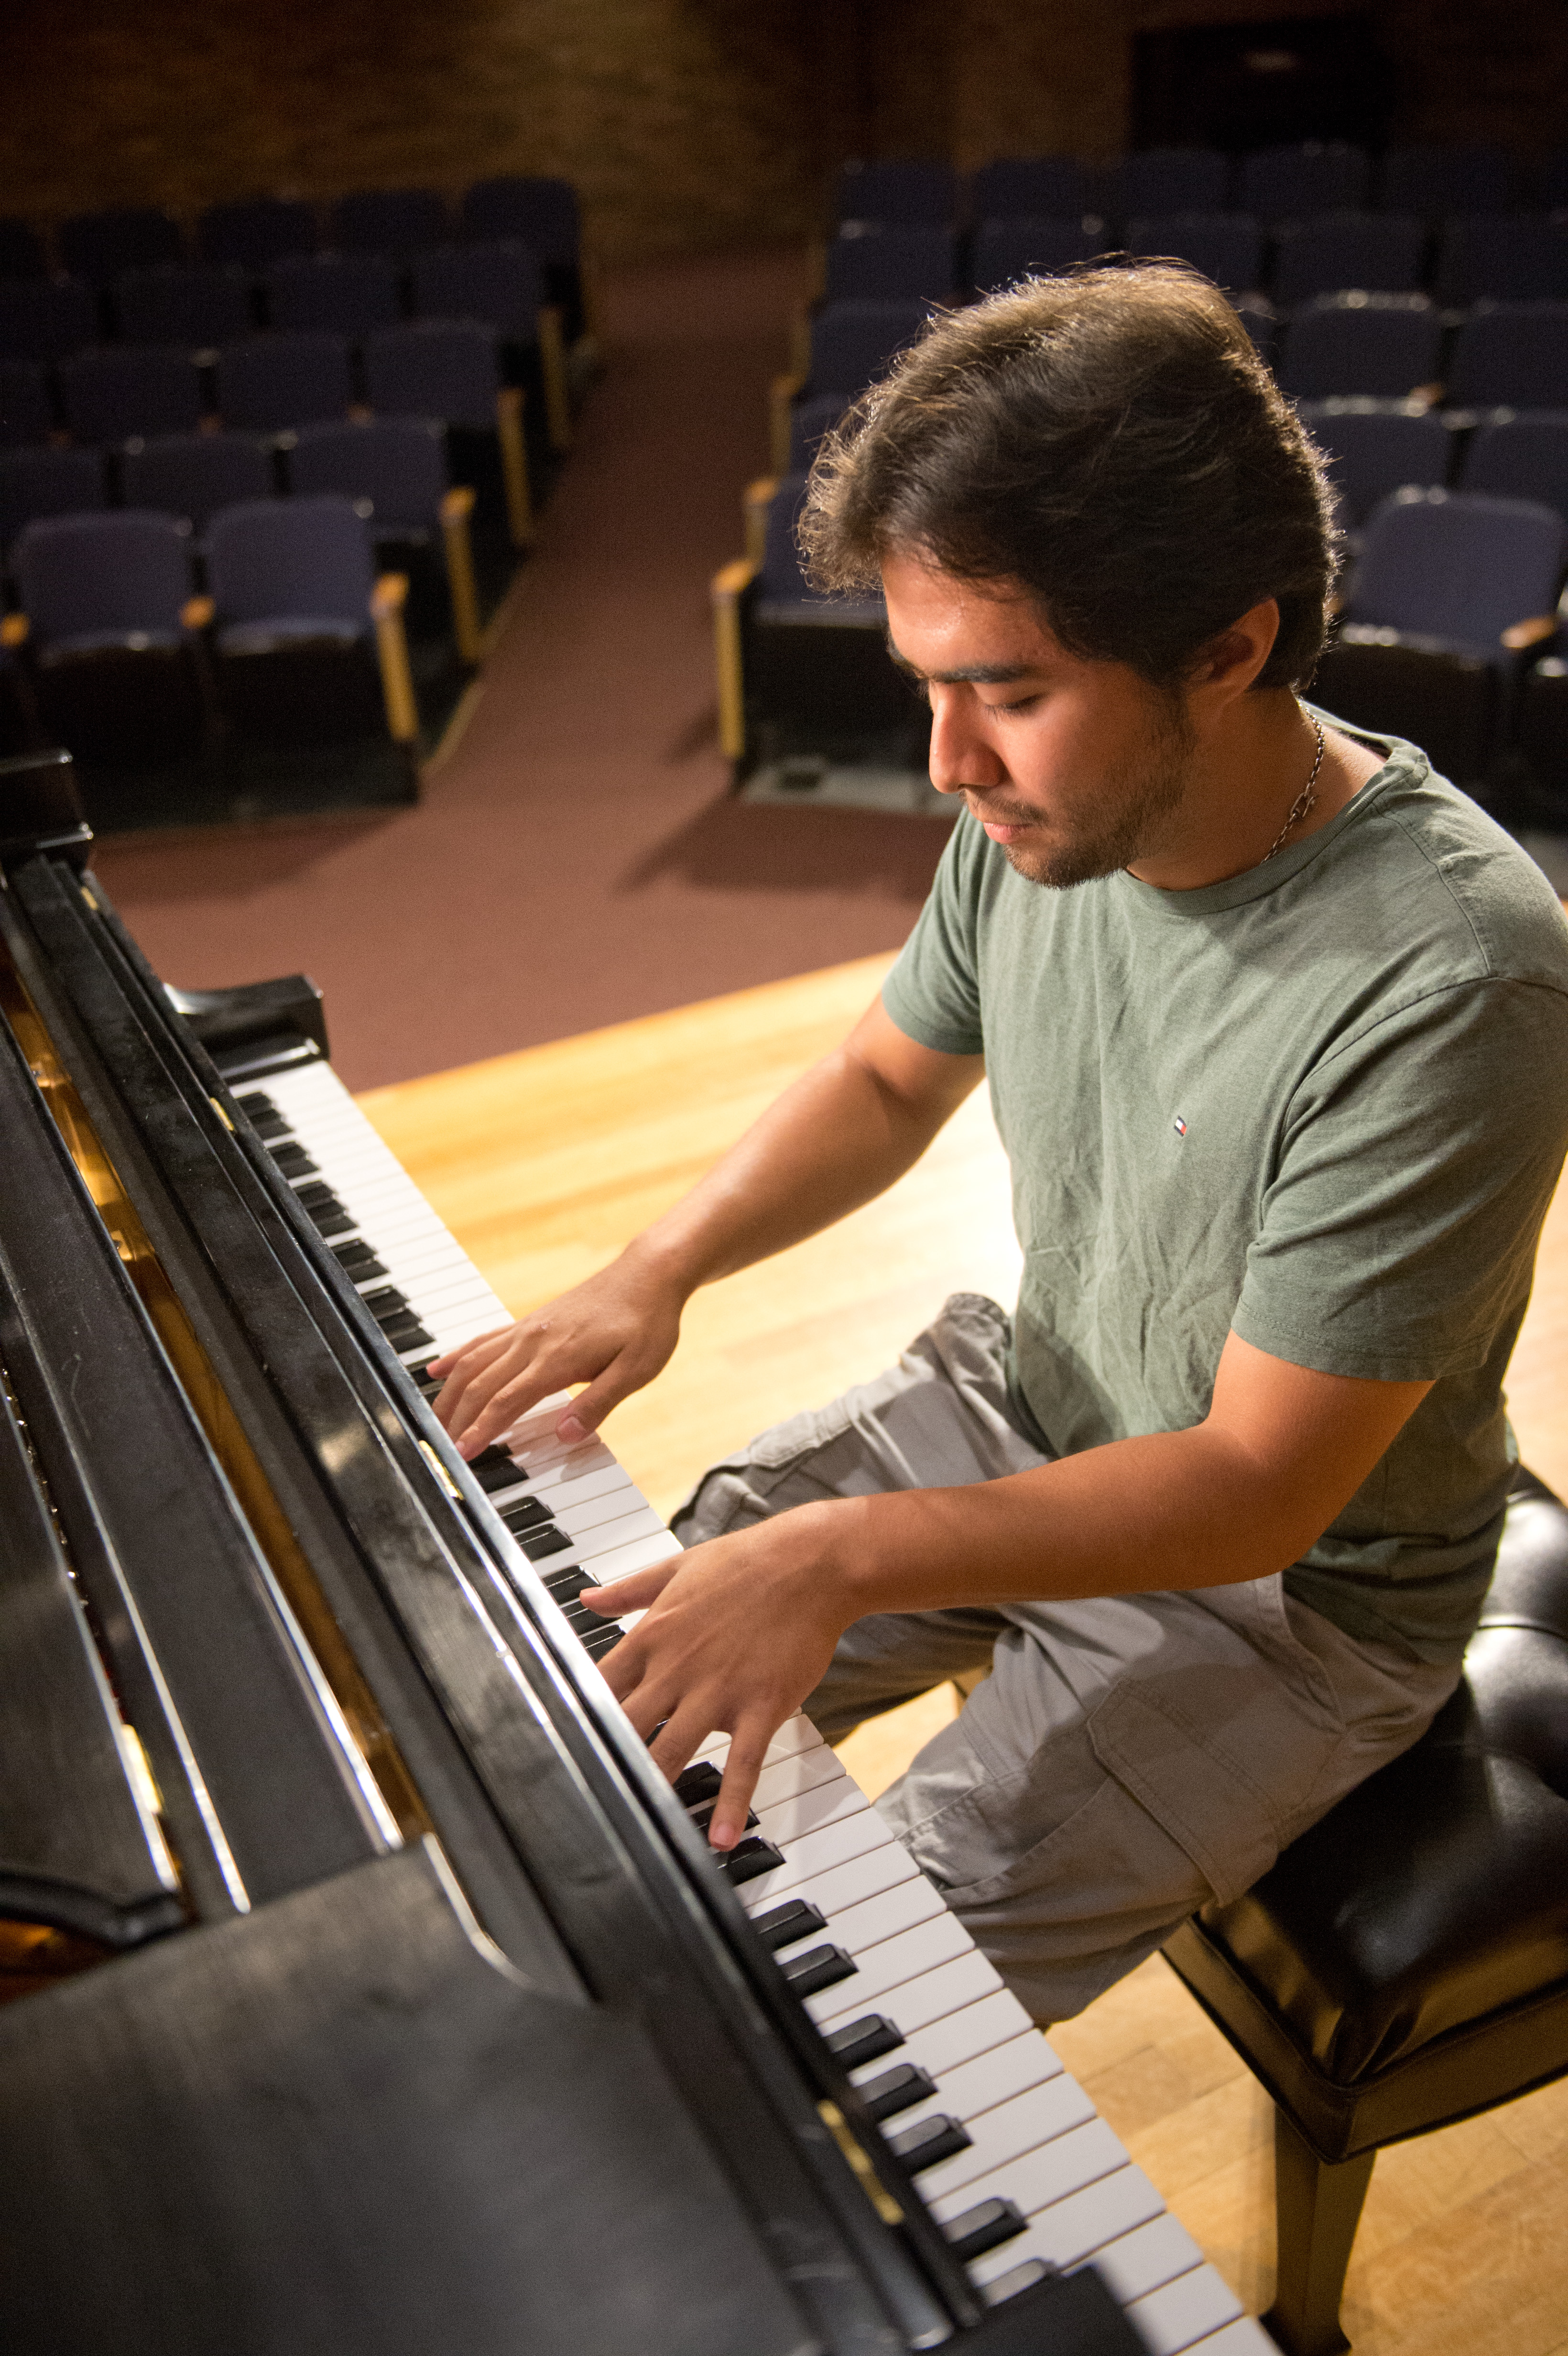 Mount Union student playing the piano on stage.